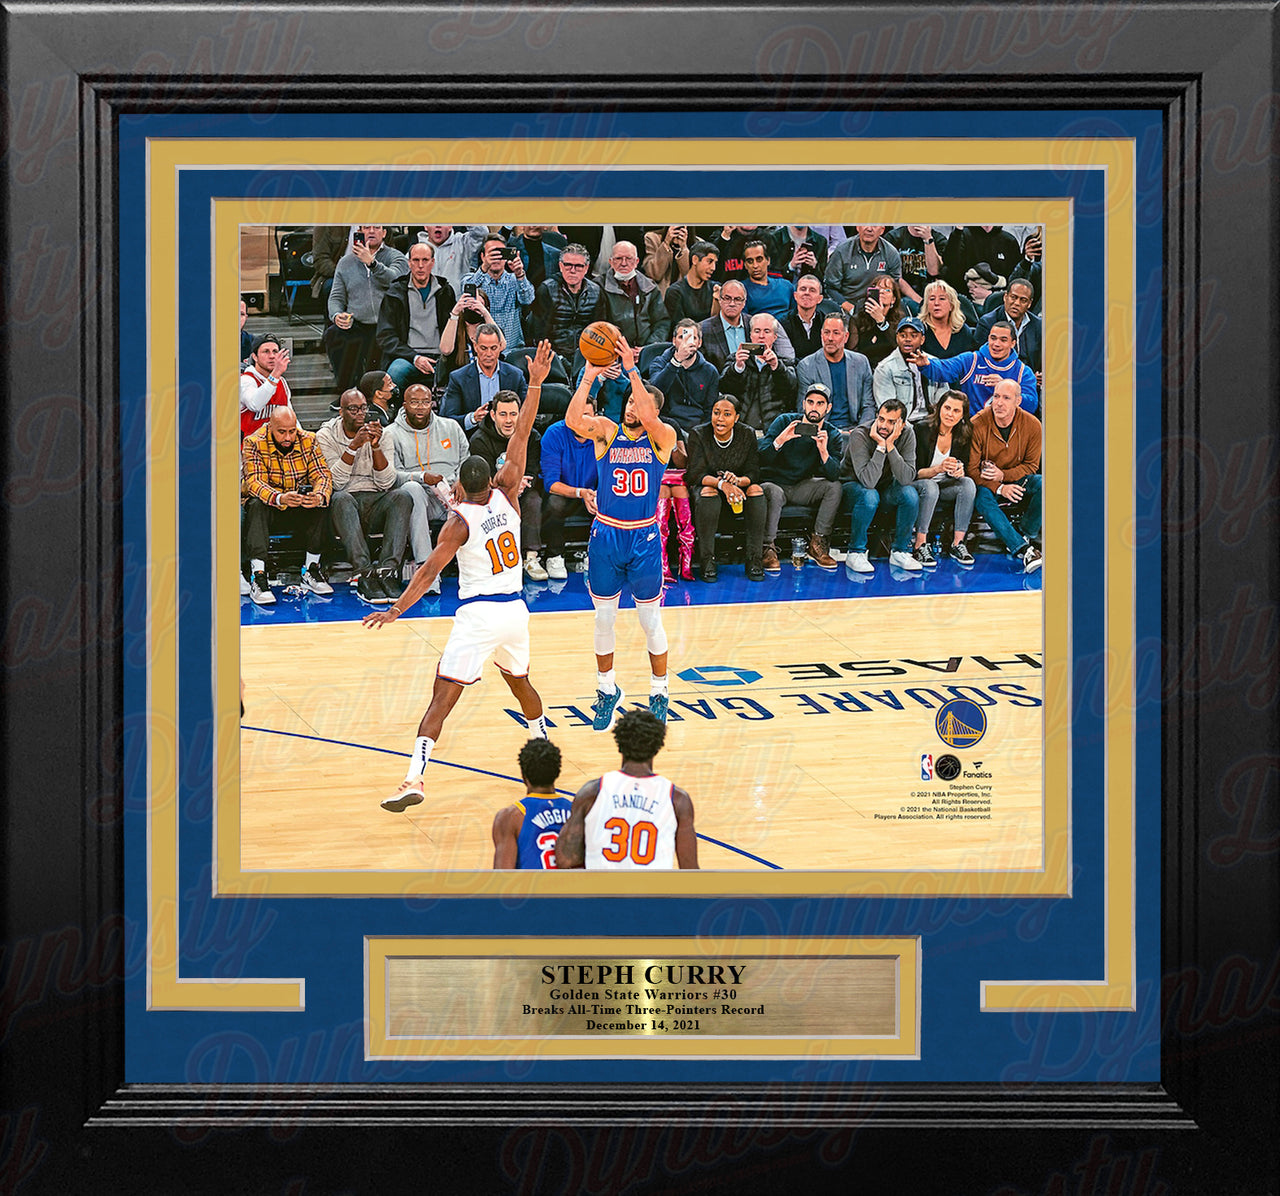 Steph Curry 3-Point Record-Breaking Shot Golden State Warriors 8" x 10" Framed Basketball Photo - Dynasty Sports & Framing 